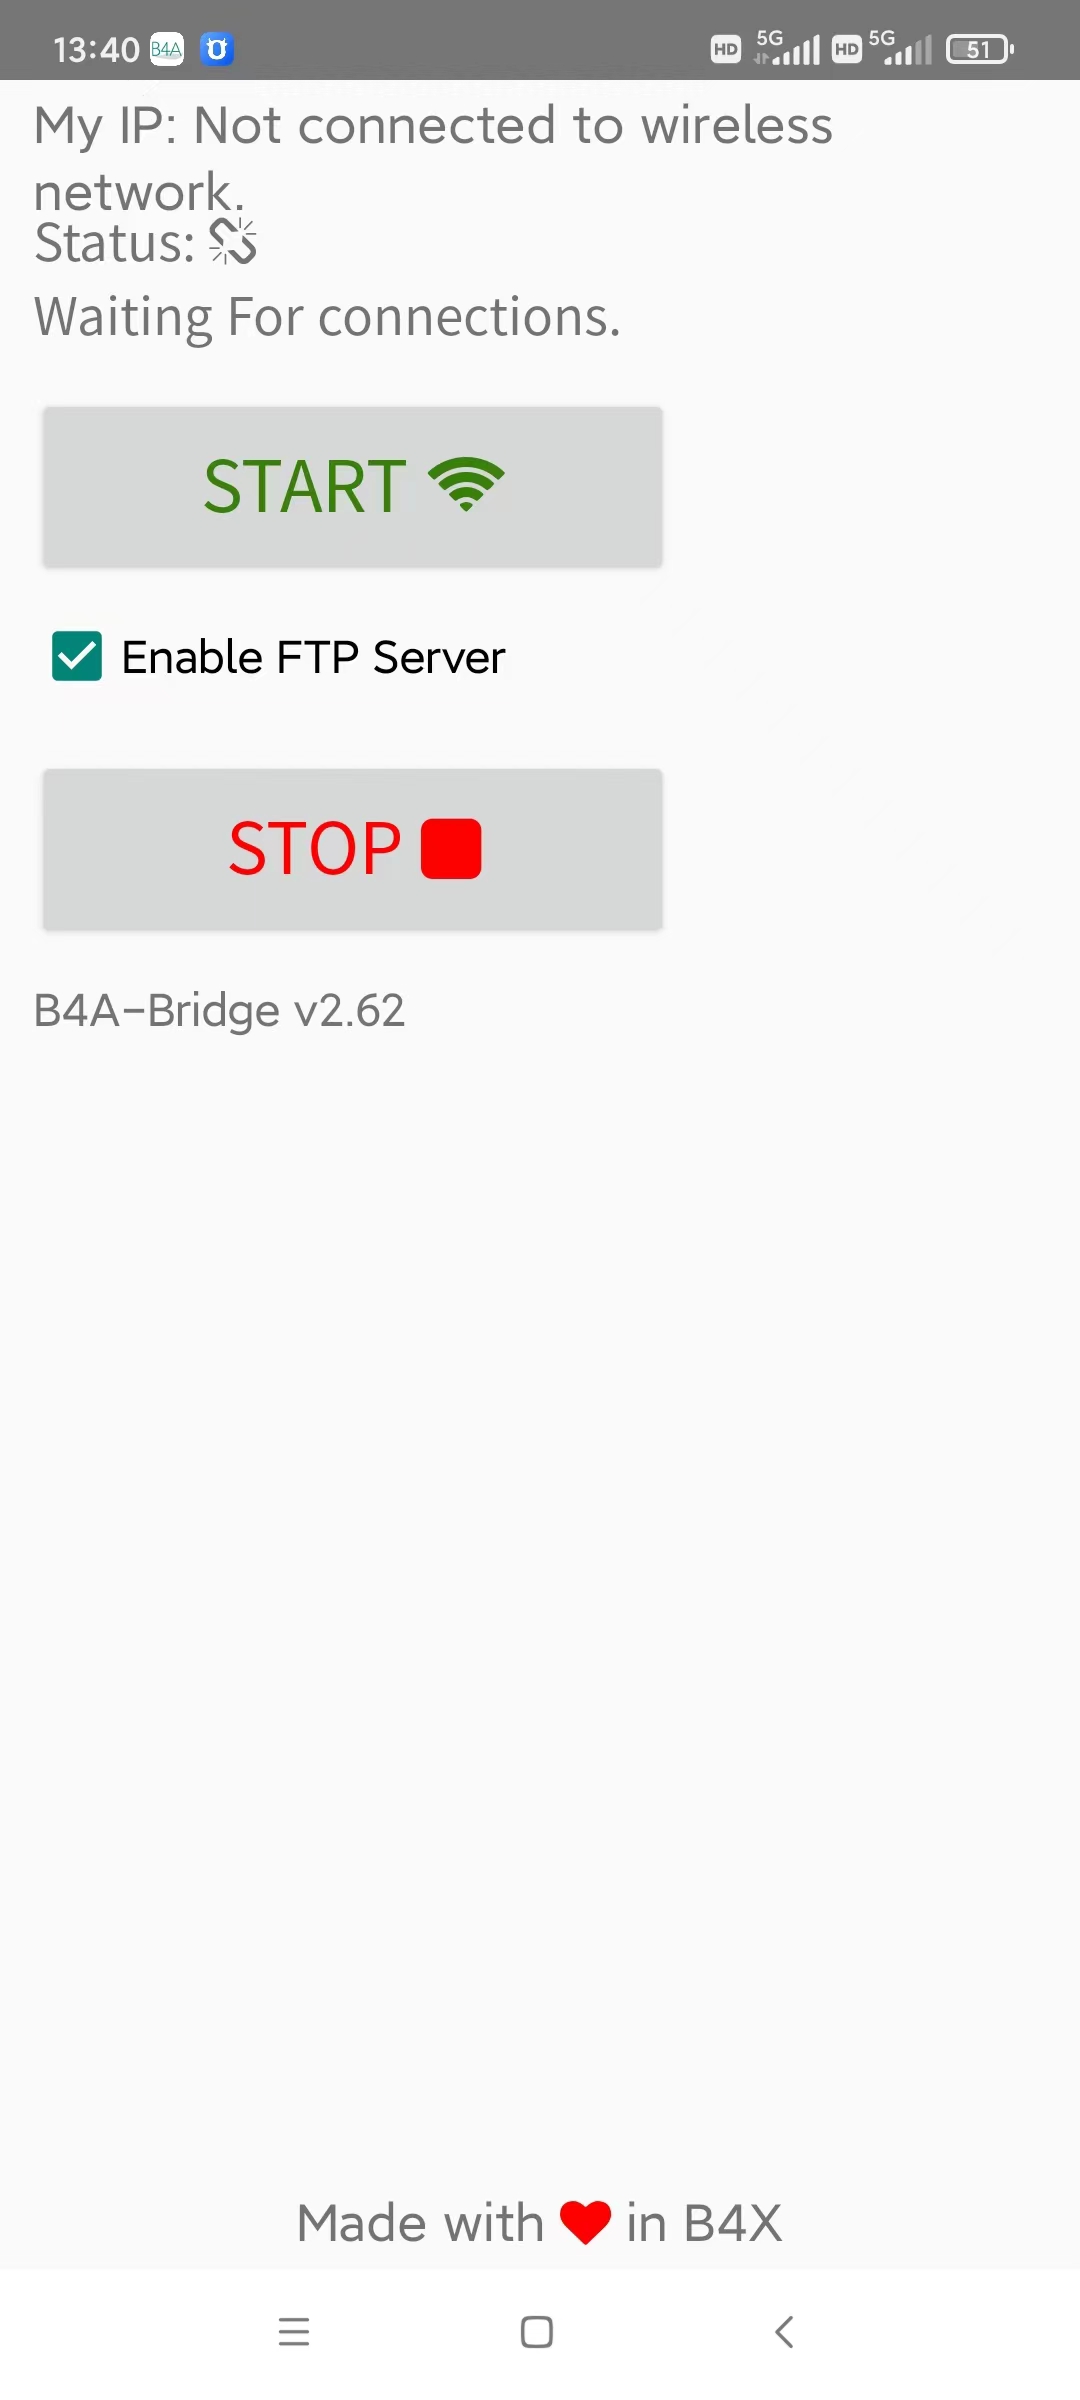 B4A-Bridge：My IP：Not connected to wireless network